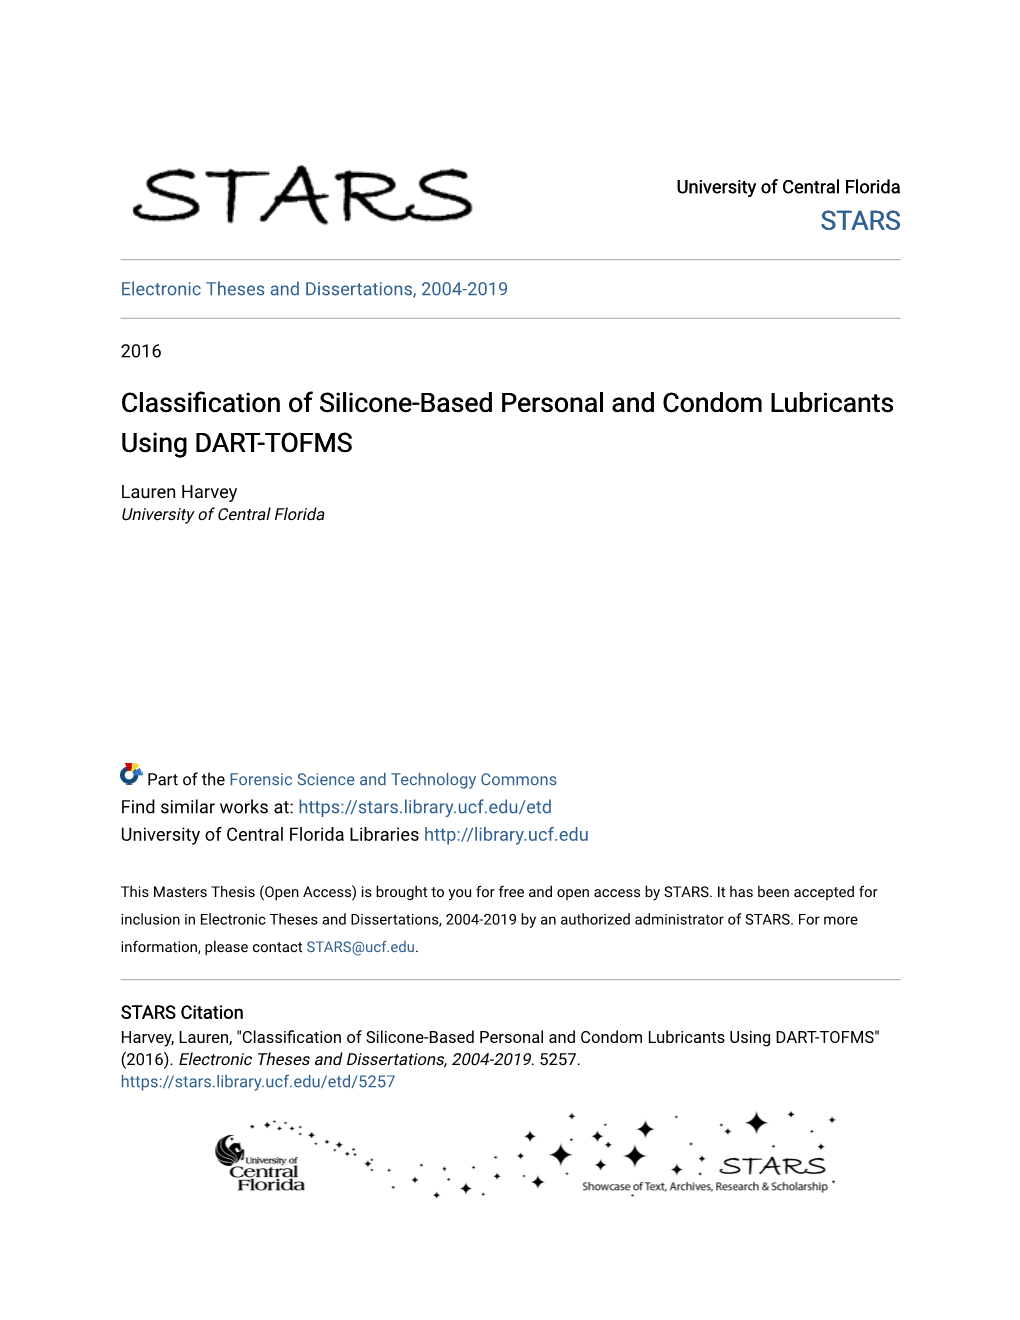 Classification of Silicone-Based Personal and Condom Lubricants Using Dart-Tofms